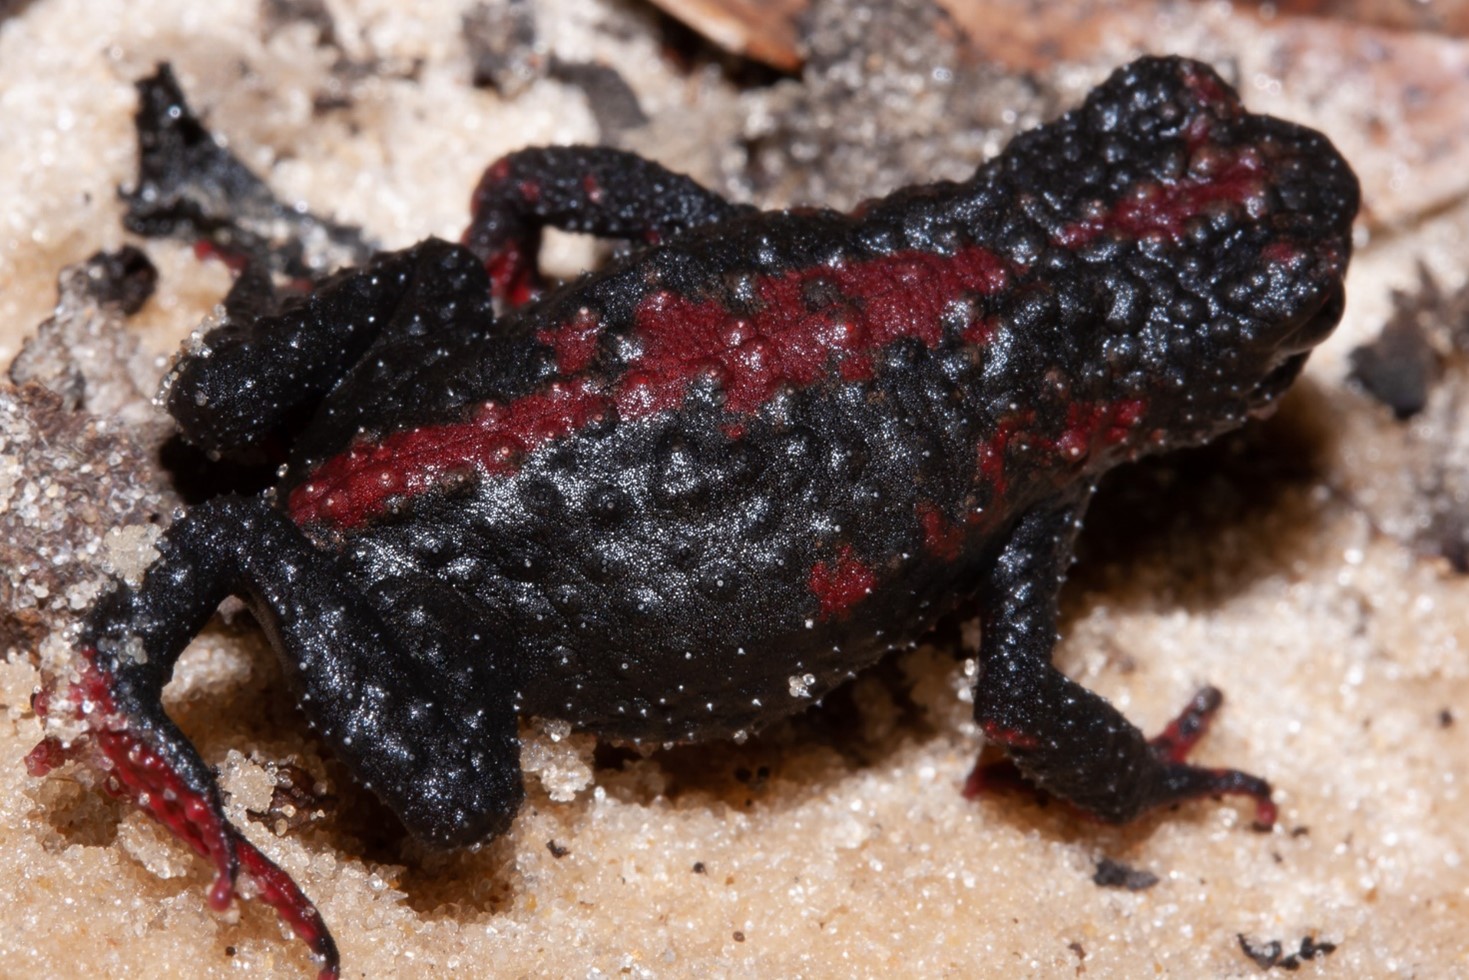 A black toad with red streaks against a sandy background